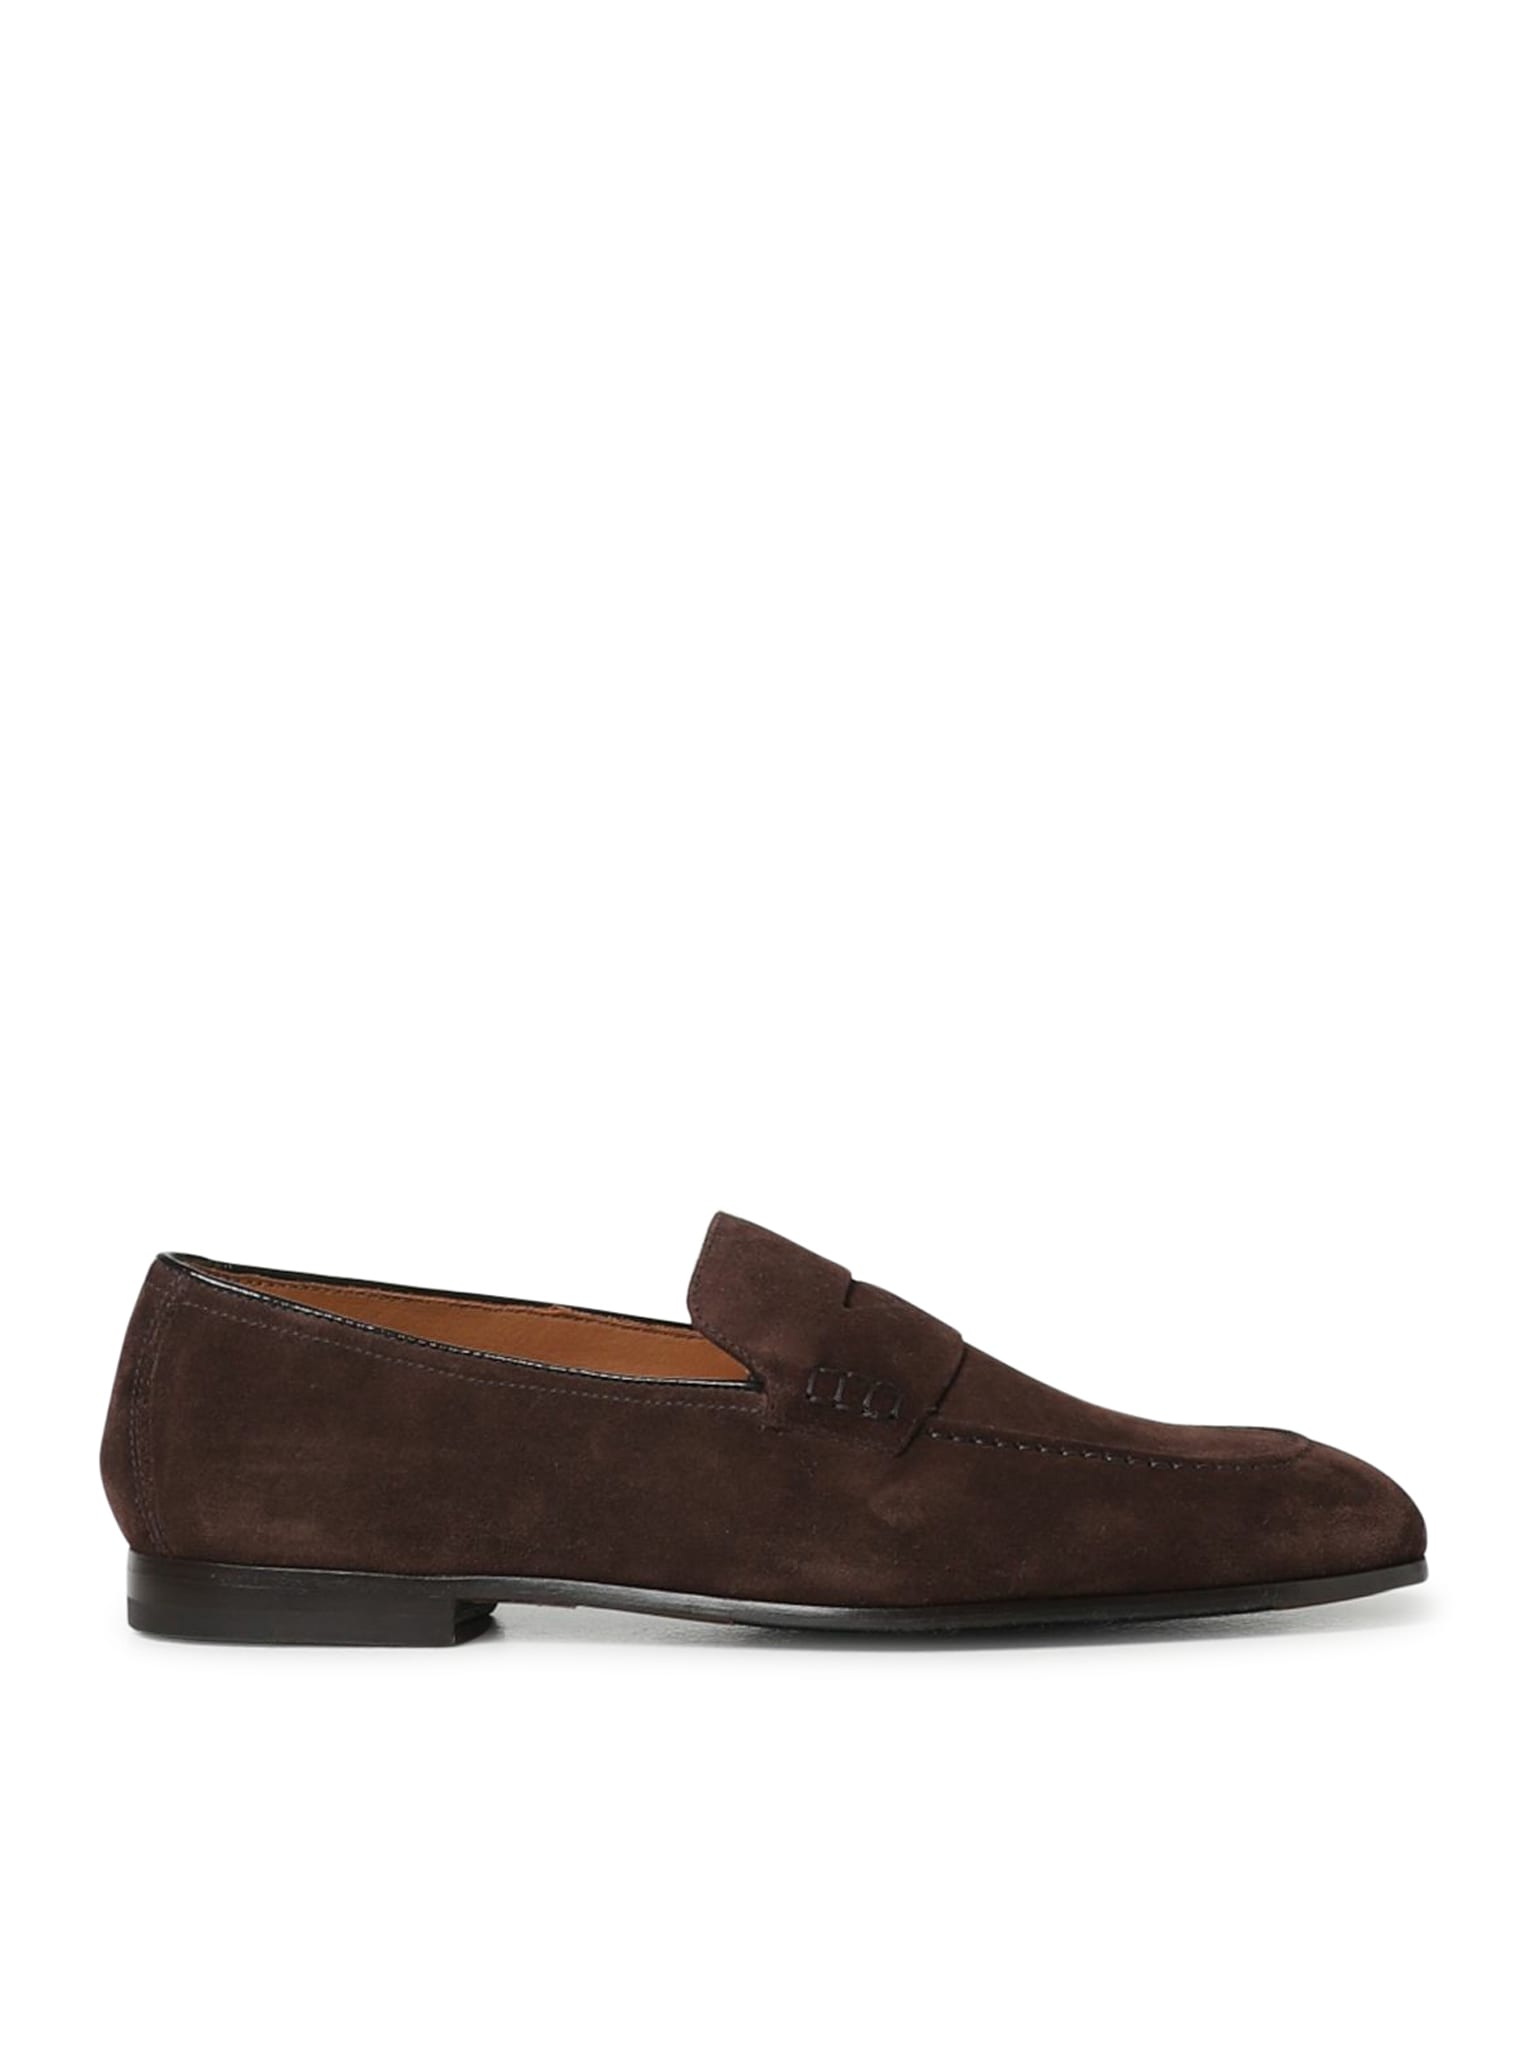 DOUCAL'S LOAFER SUEDE